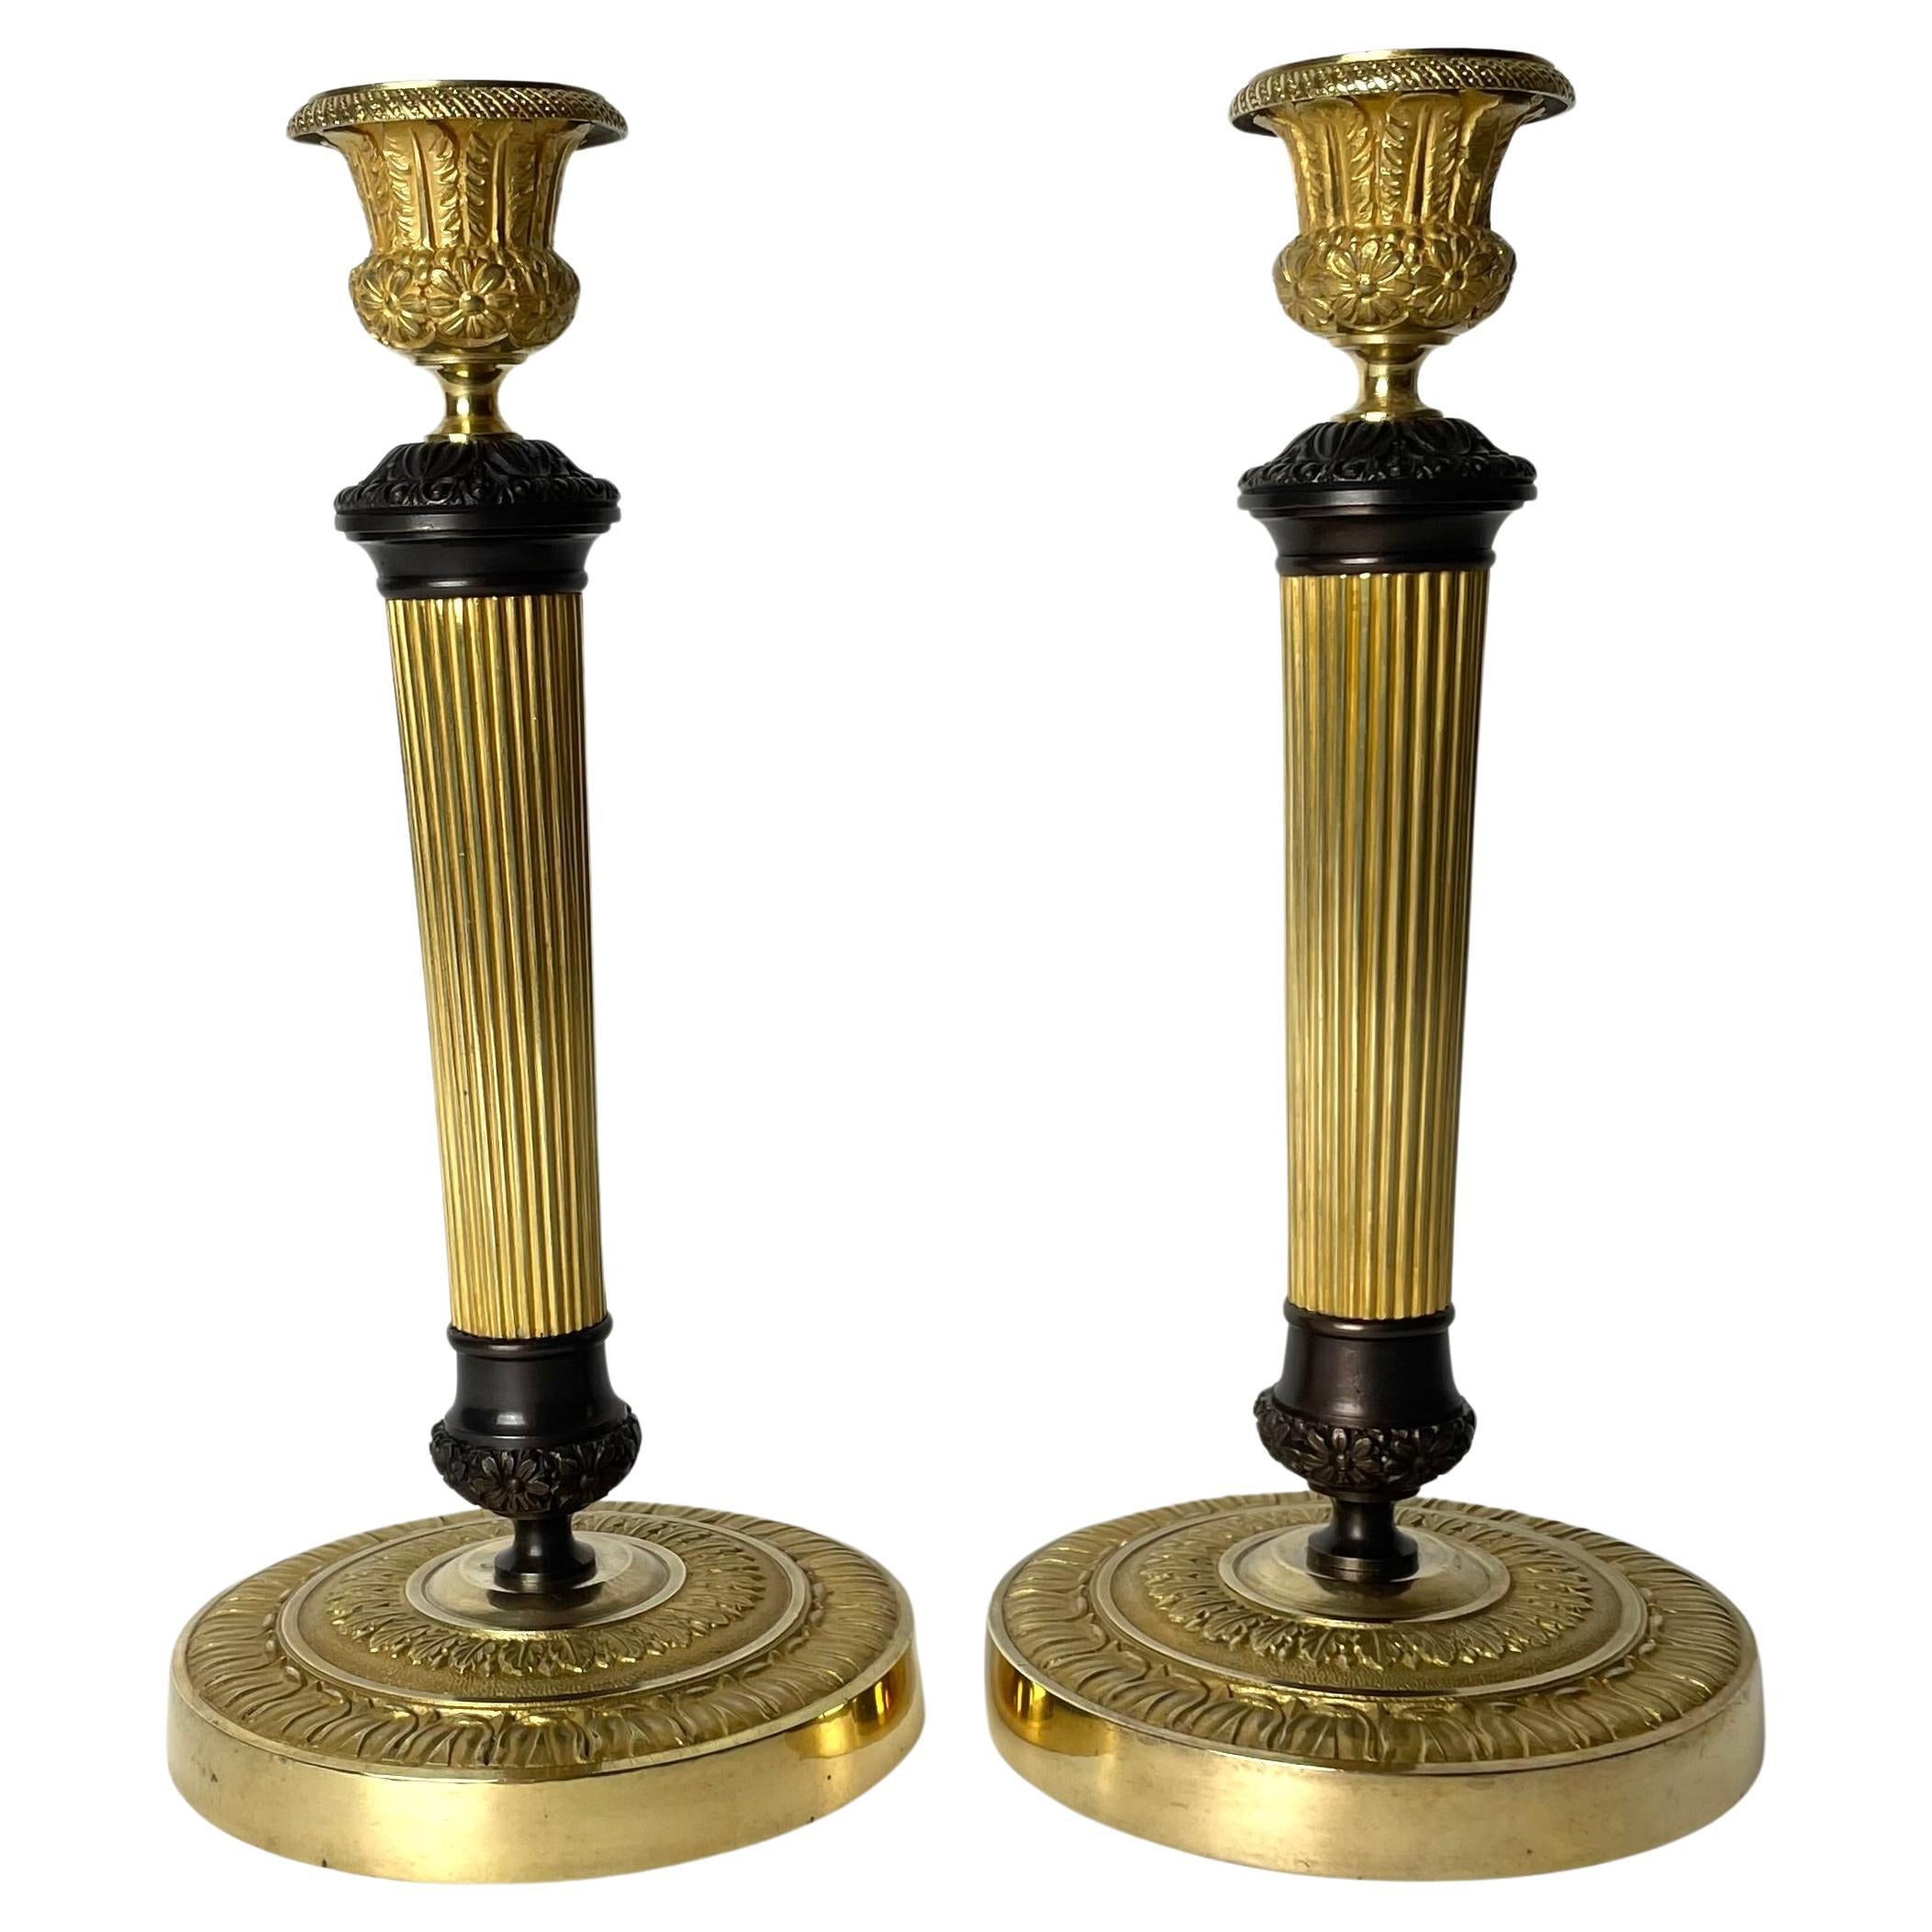 Beautiful pair of Empire Candlesticks in gilt and dark patinated bronze. 1820s